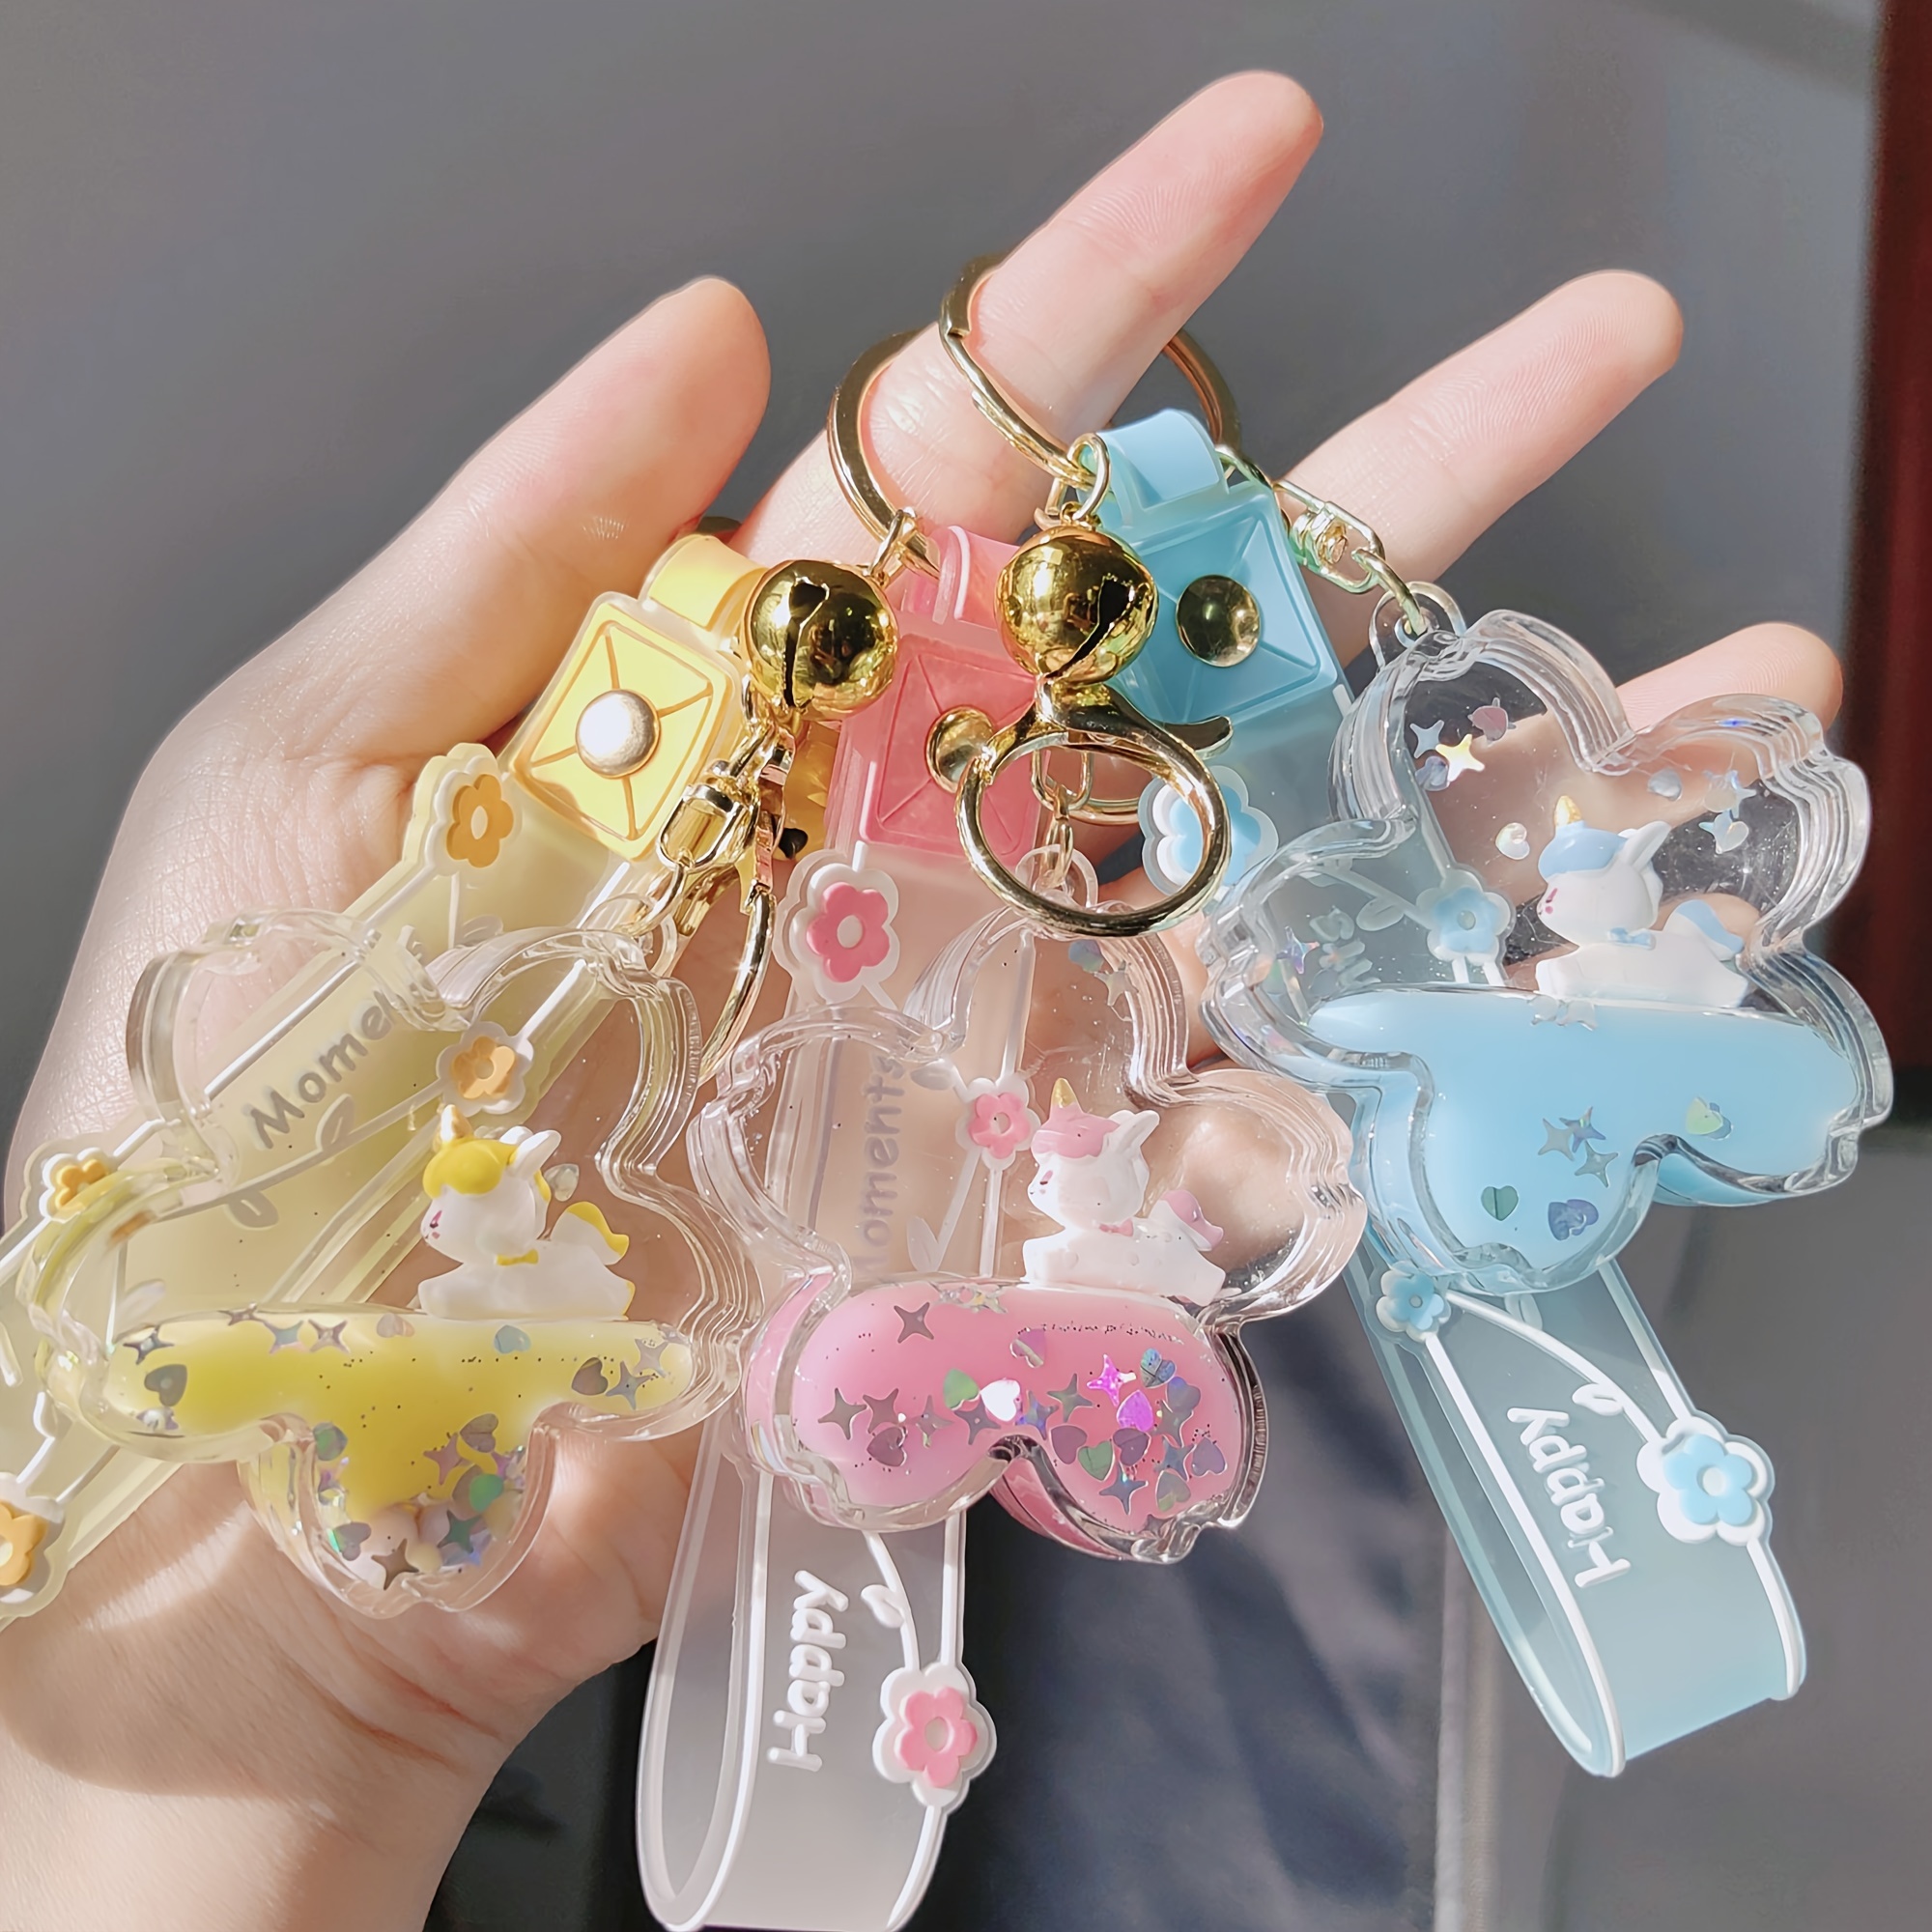 

Colorful Cartoon Flowers Charm Keychain, Fashionable Backpack Purse Ornament Keyring, Phone Accessories